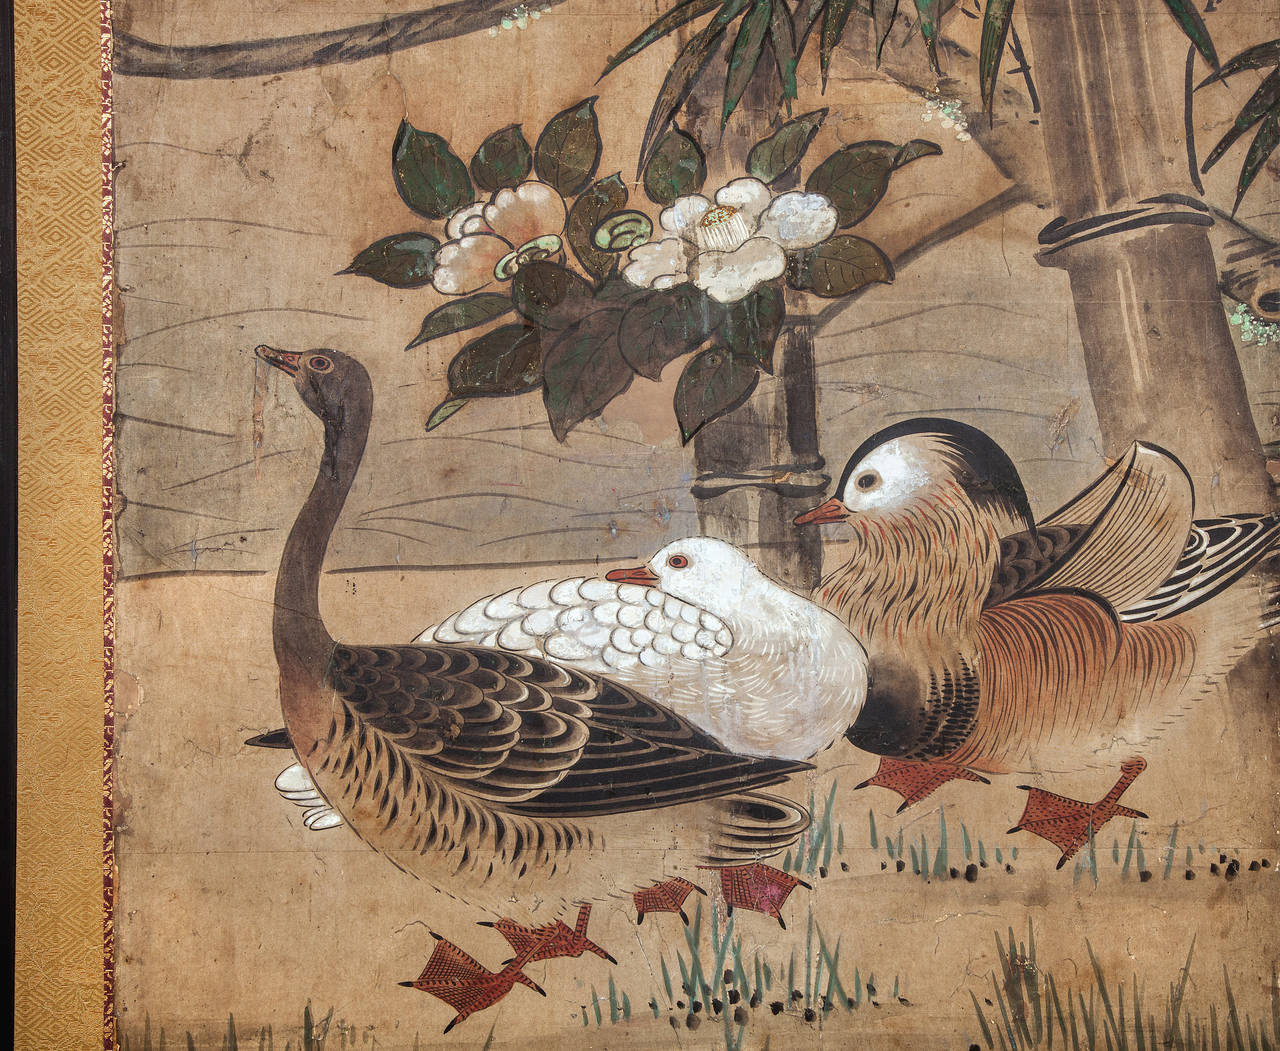 Japanese Two Panel Screen:  Mandarin Ducks and Geese Among Bamboo and Flowers, Edo period painting (c. 1850) of mandarin ducks and geese on a grassy shoreline with bamboo and white camellia flowers.  A beautiful early painting with heavy gold dust